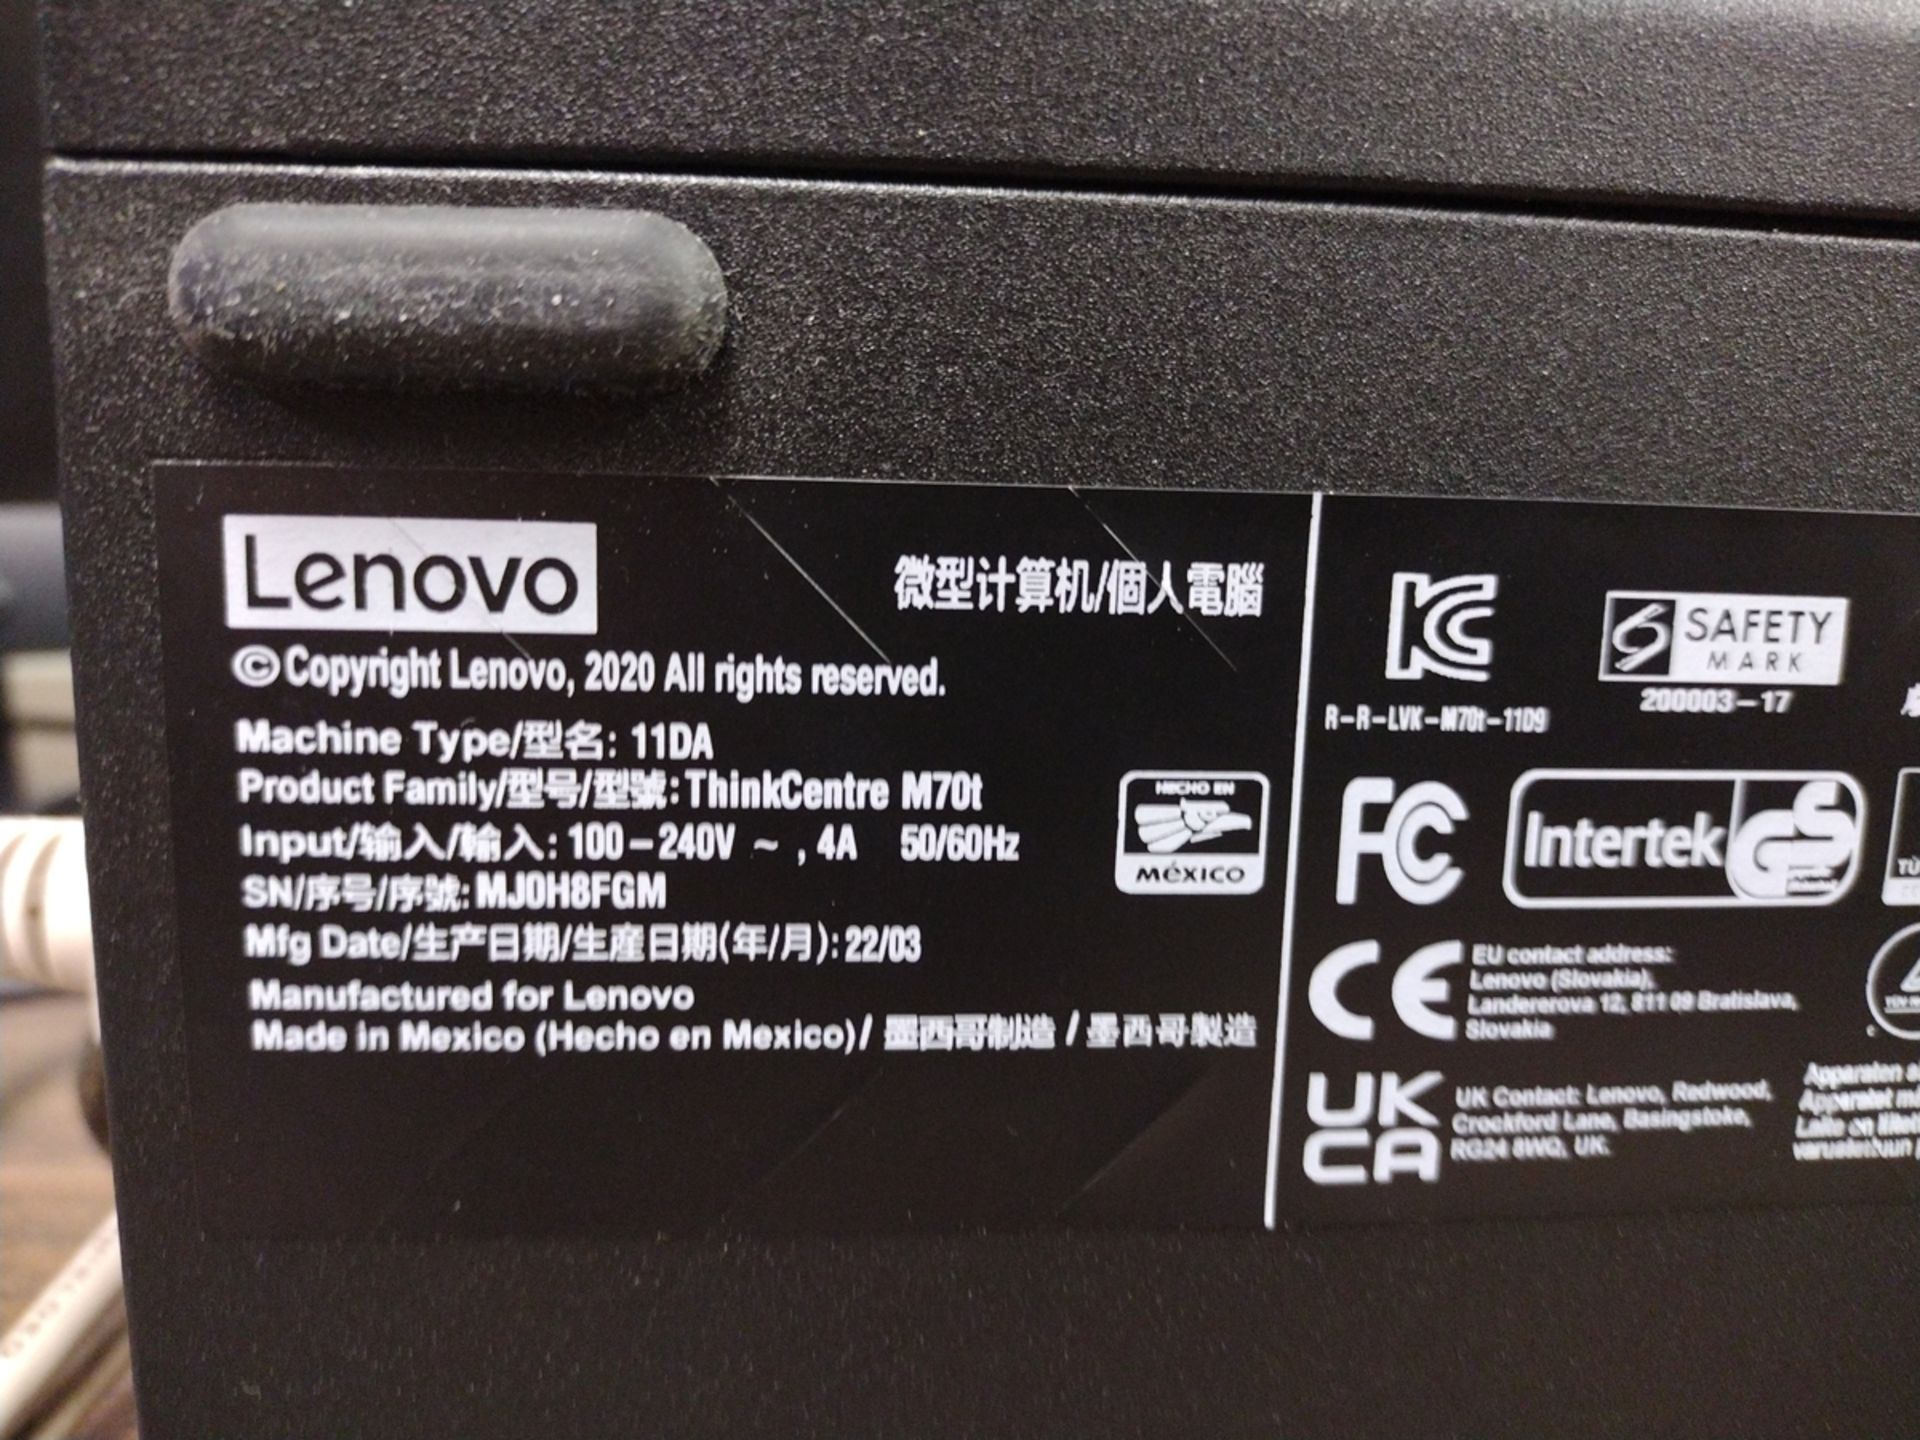 Lenovo M70t ThinkCentre i5 PC w/ Monitor and Keyboard - Image 2 of 2